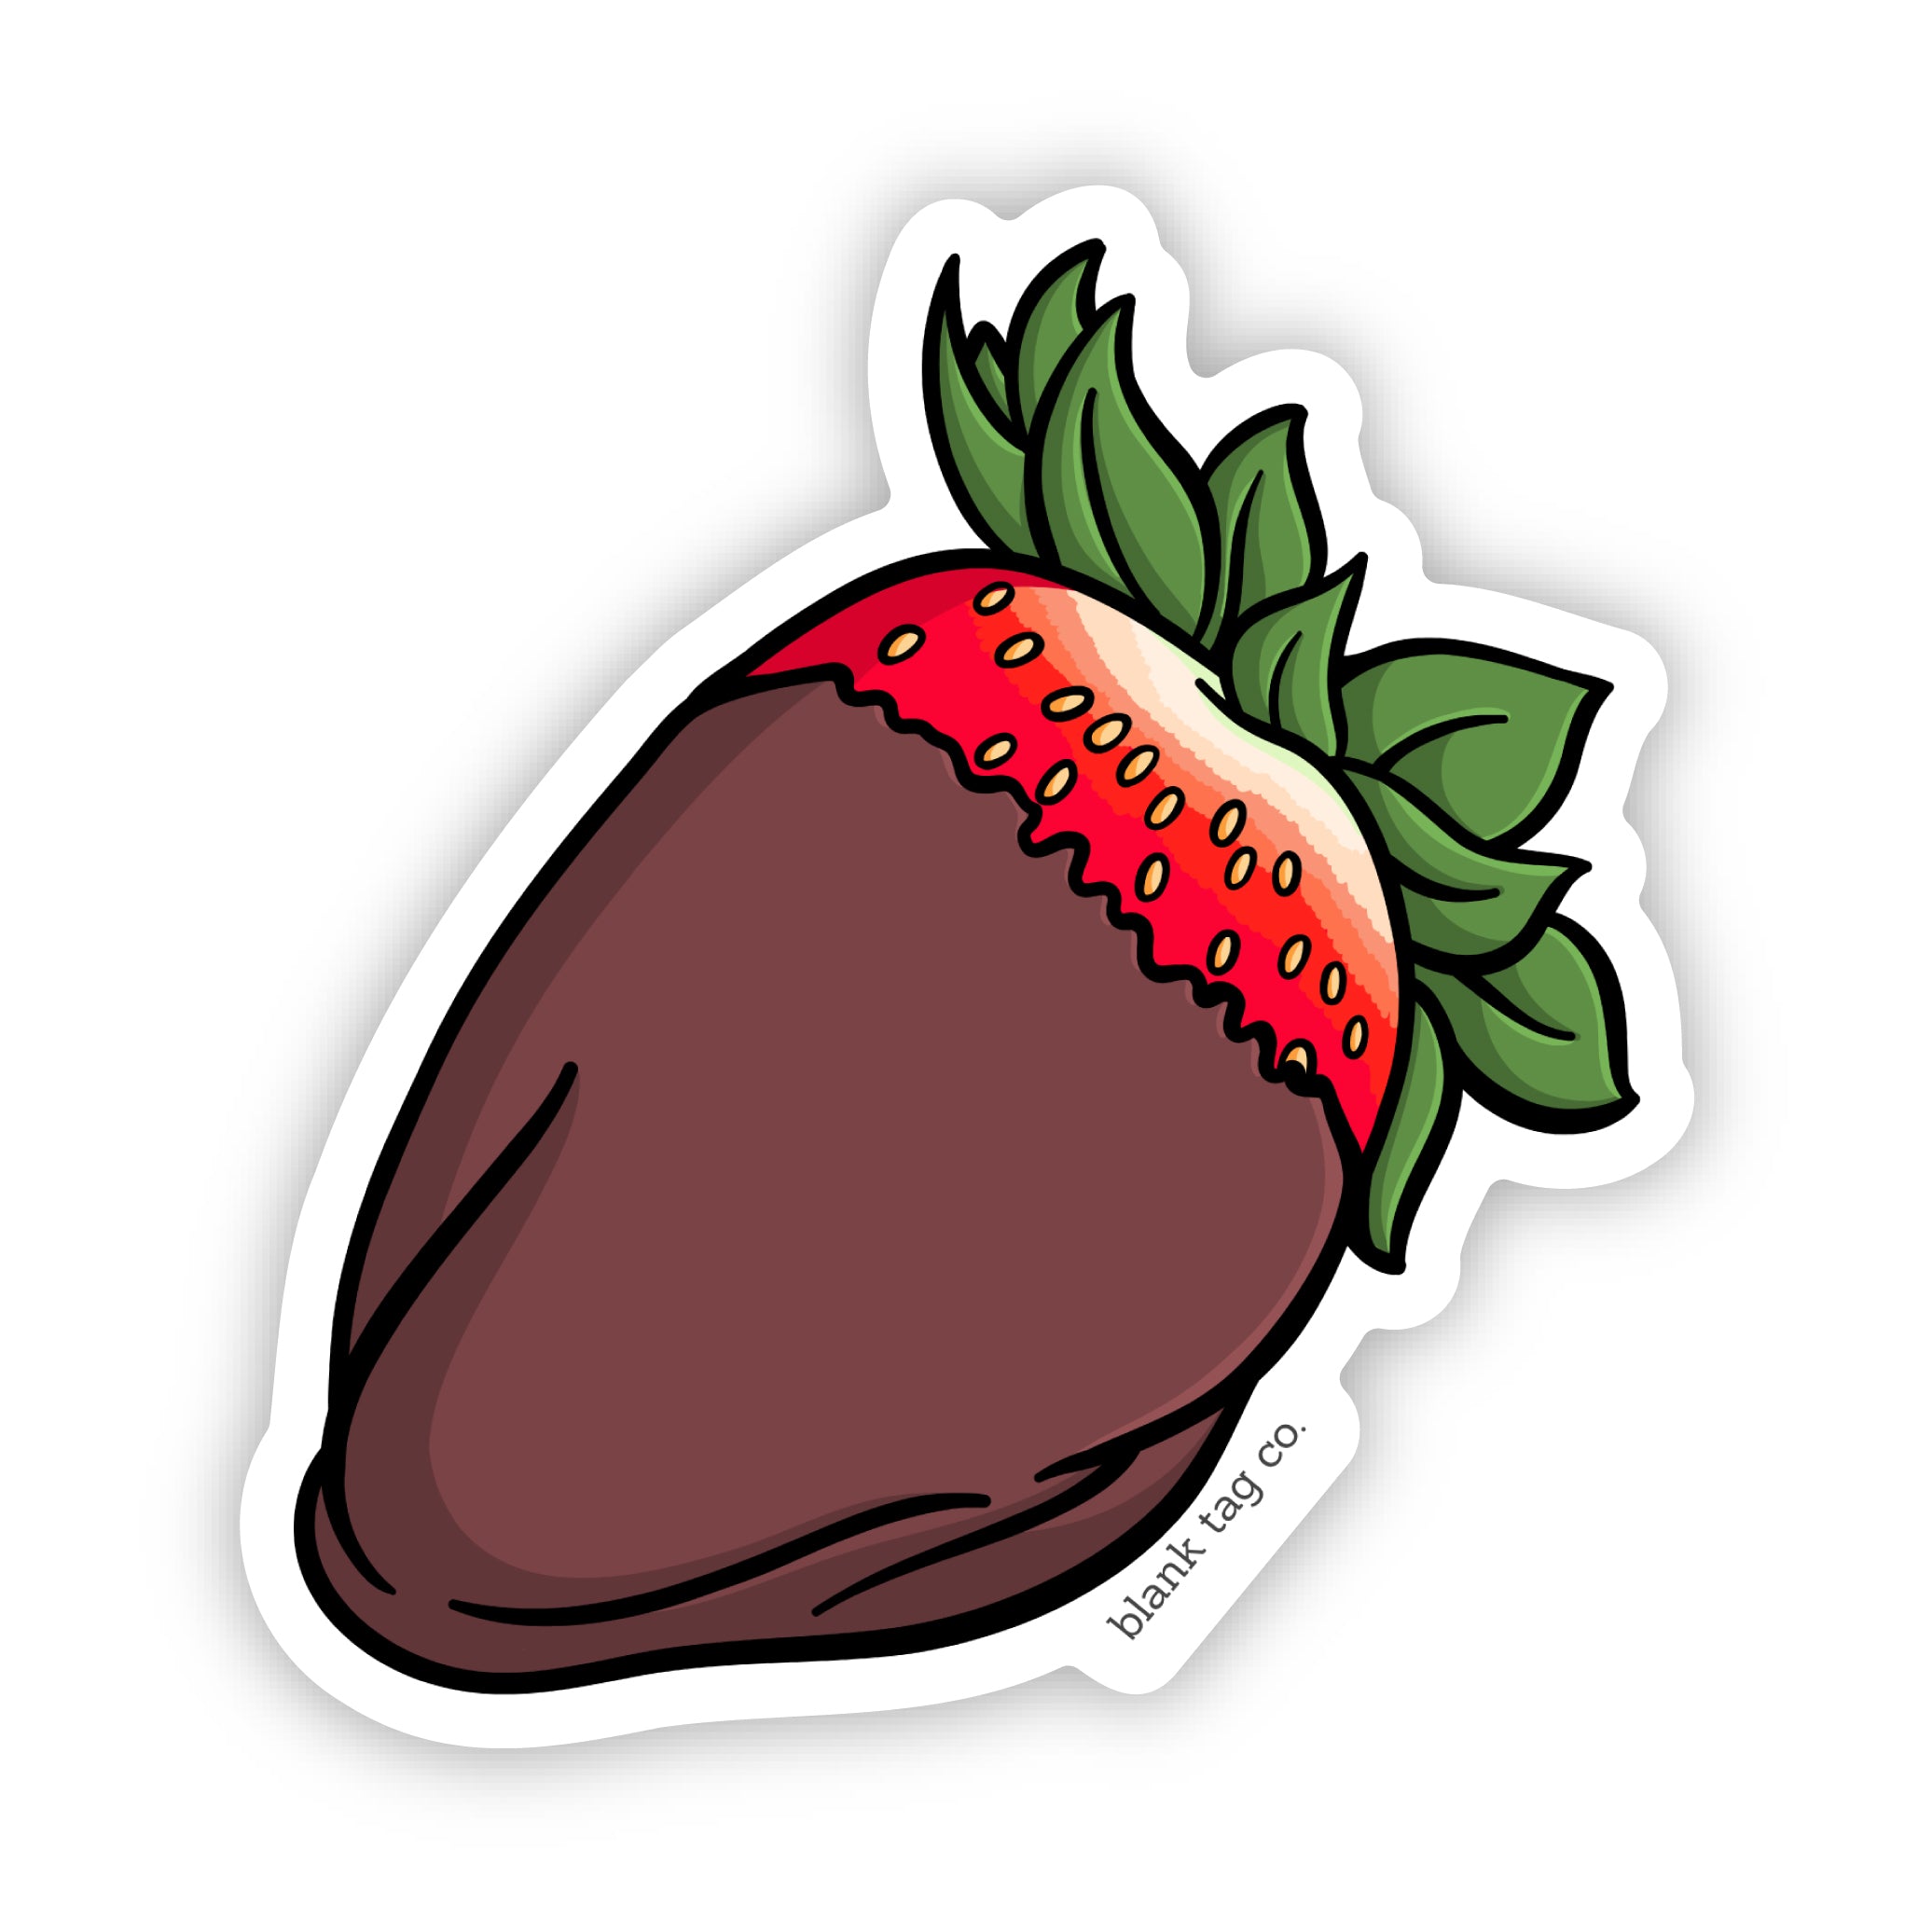 The Chocolate Covered Strawberry Sticker